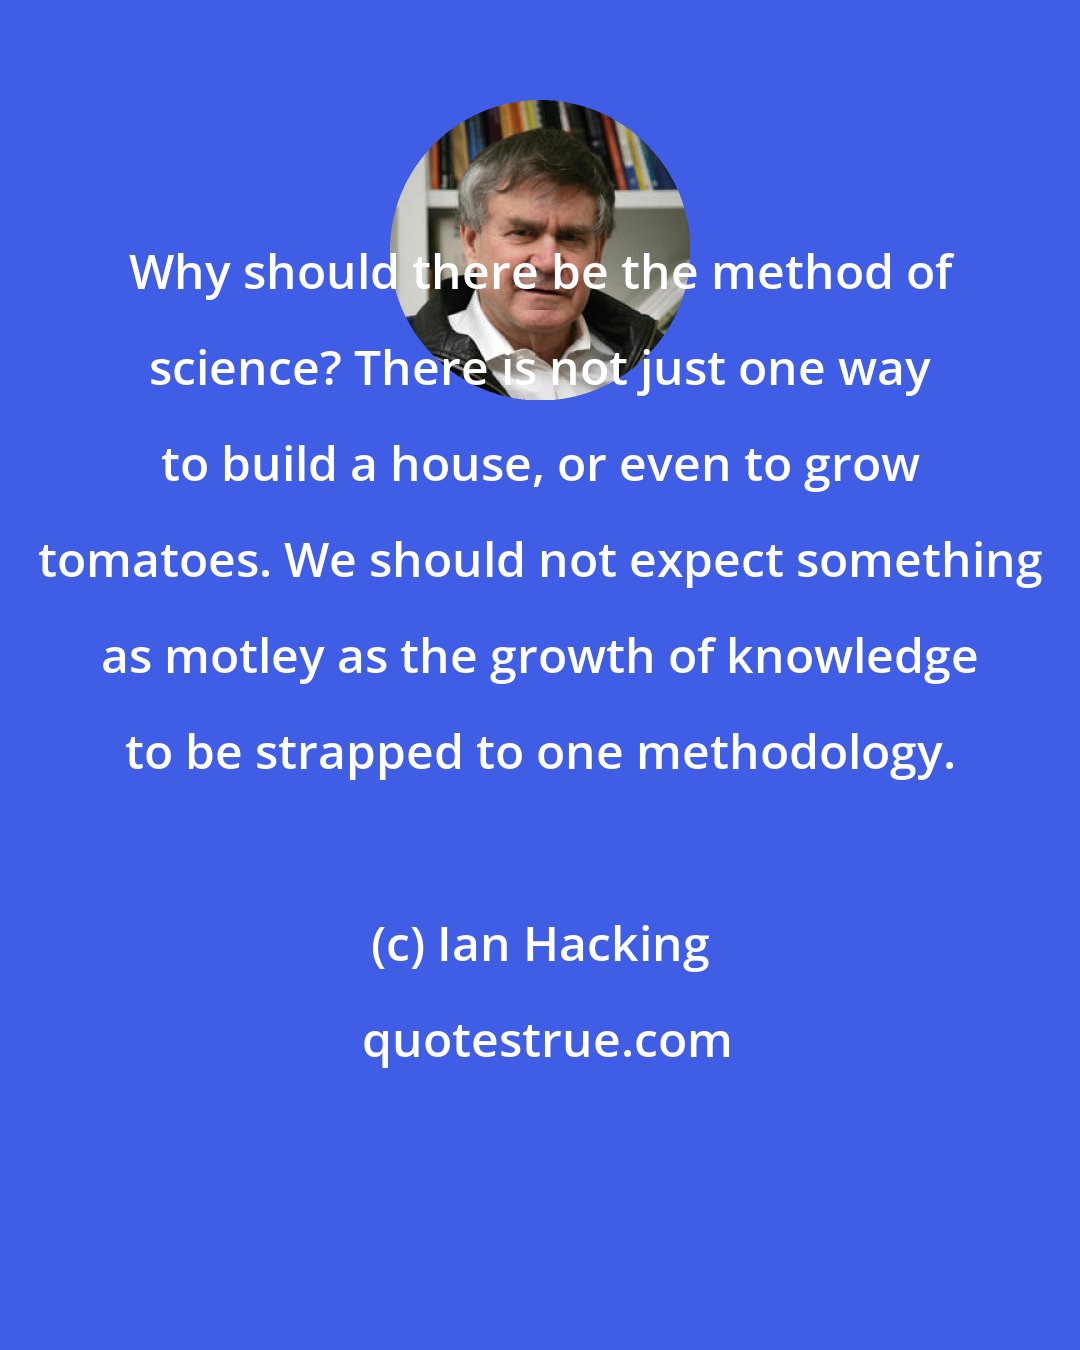 Ian Hacking: Why should there be the method of science? There is not just one way to build a house, or even to grow tomatoes. We should not expect something as motley as the growth of knowledge to be strapped to one methodology.